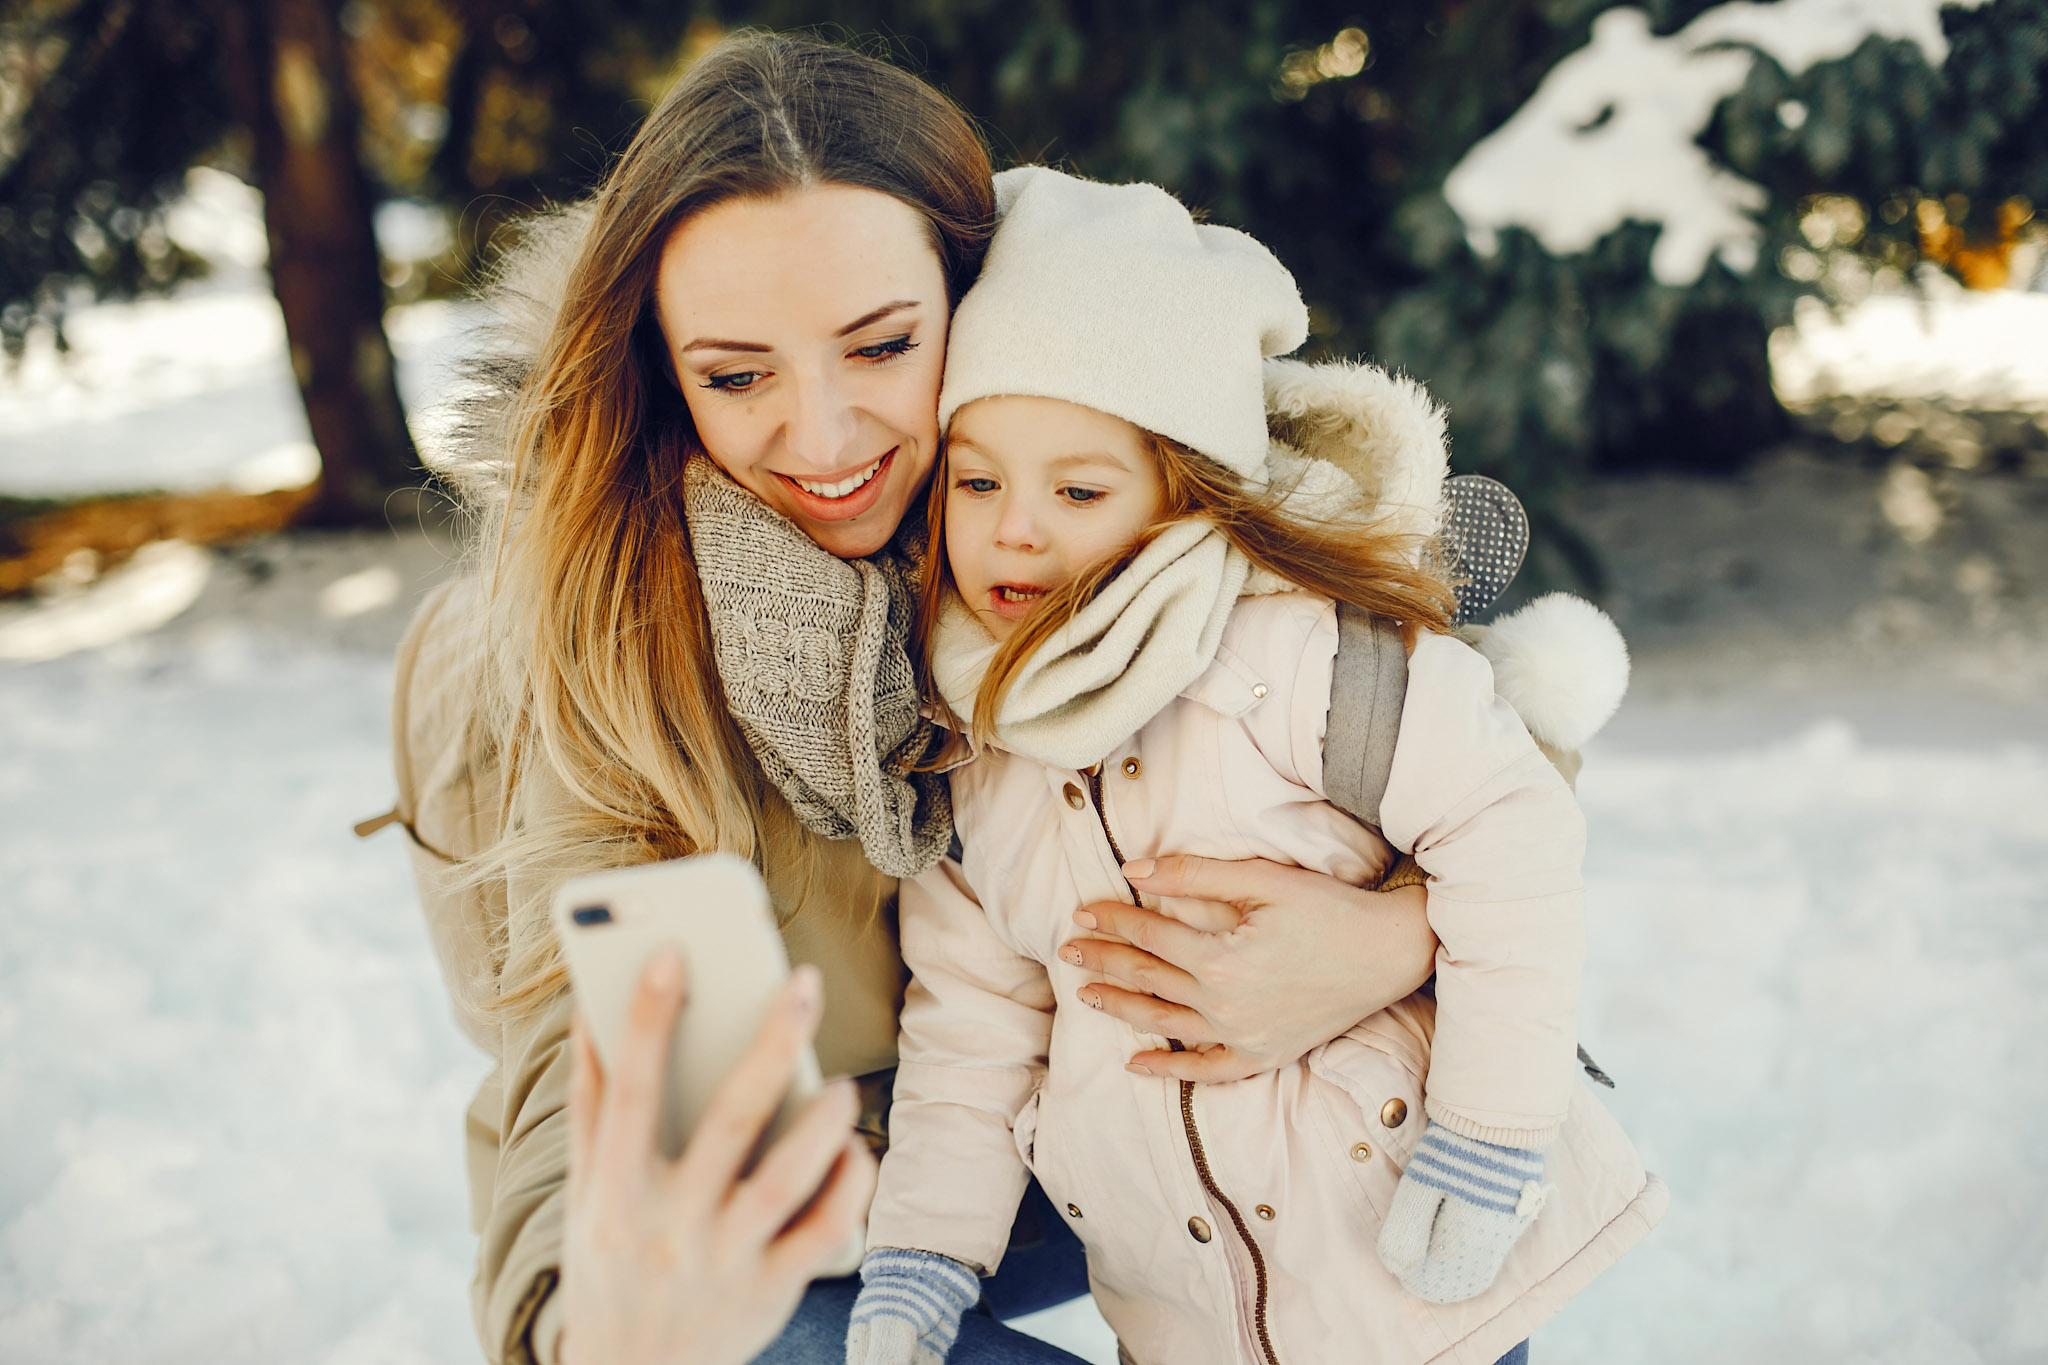 stock photo of a mother outside in snowy weather with her daughter while using a smartphone